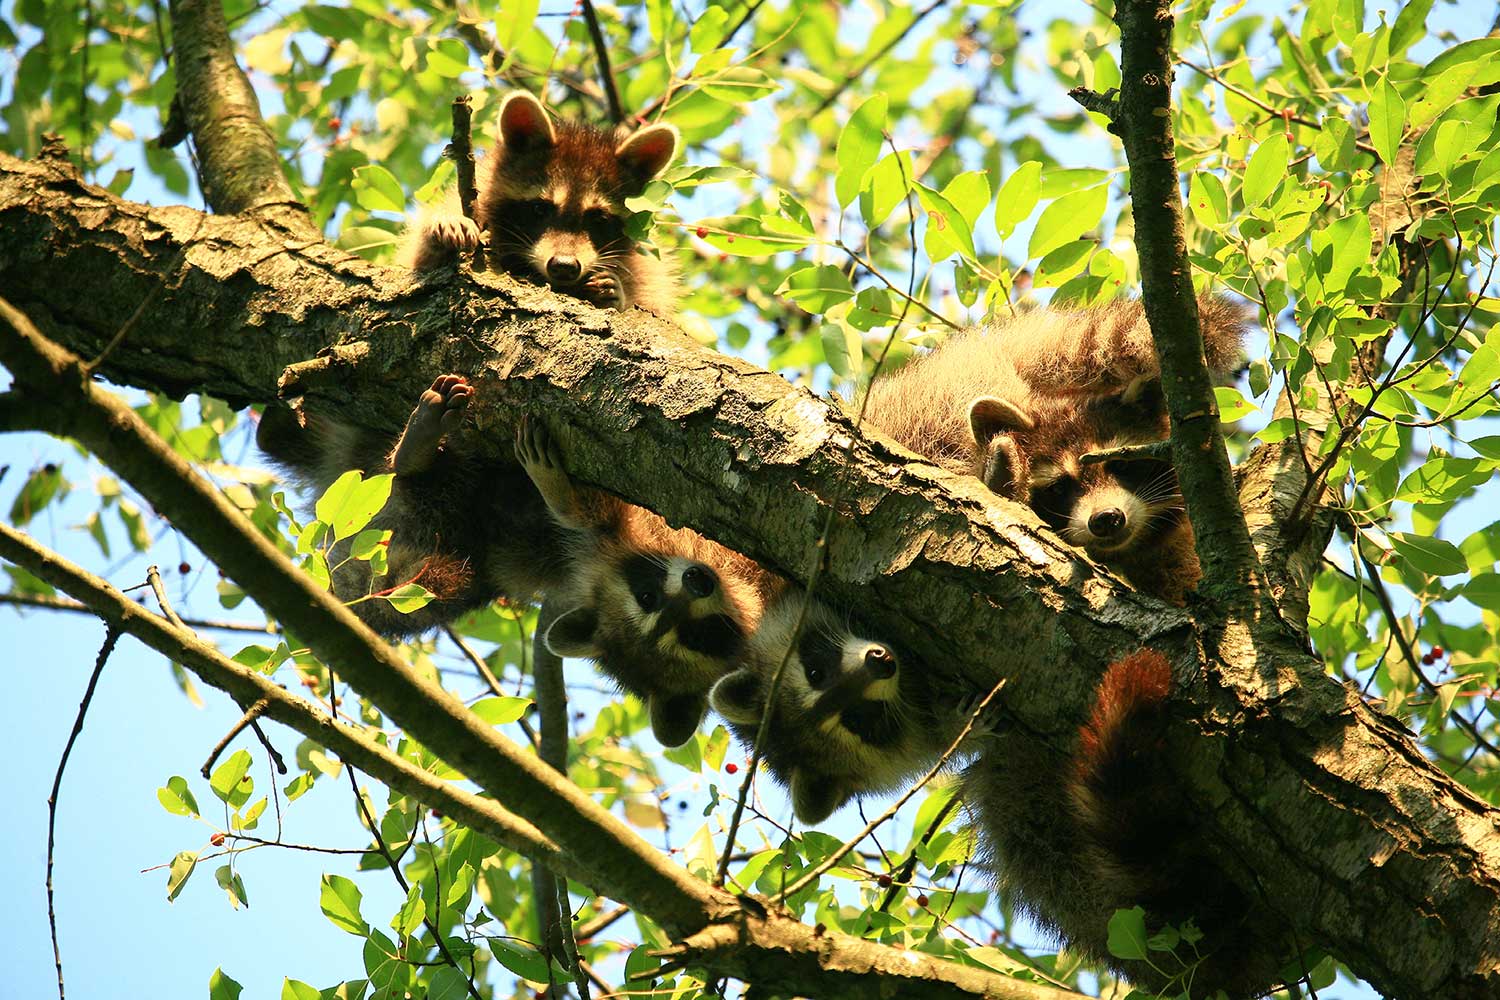 A group of four young raccoons clinging onto a tree limb while looking down to the ground.